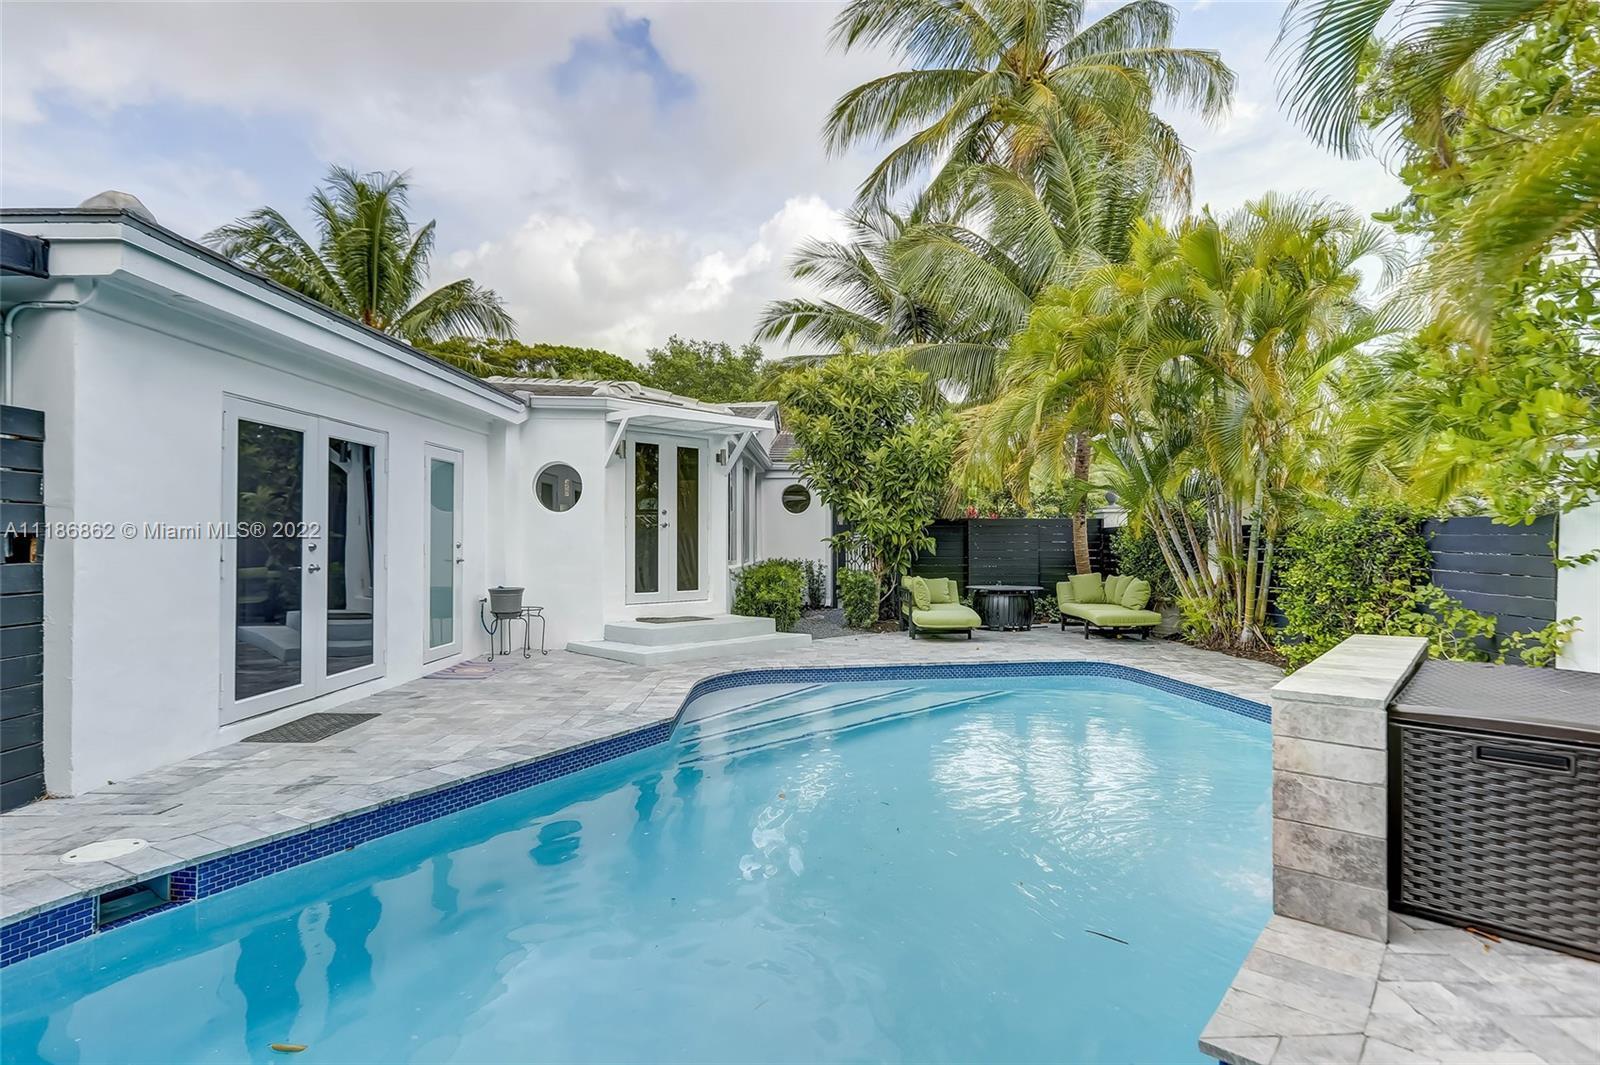 A haven of serenity in the heart of Fort Lauderdale, this 4 bd, 4 ba oasis takes elevated living to 